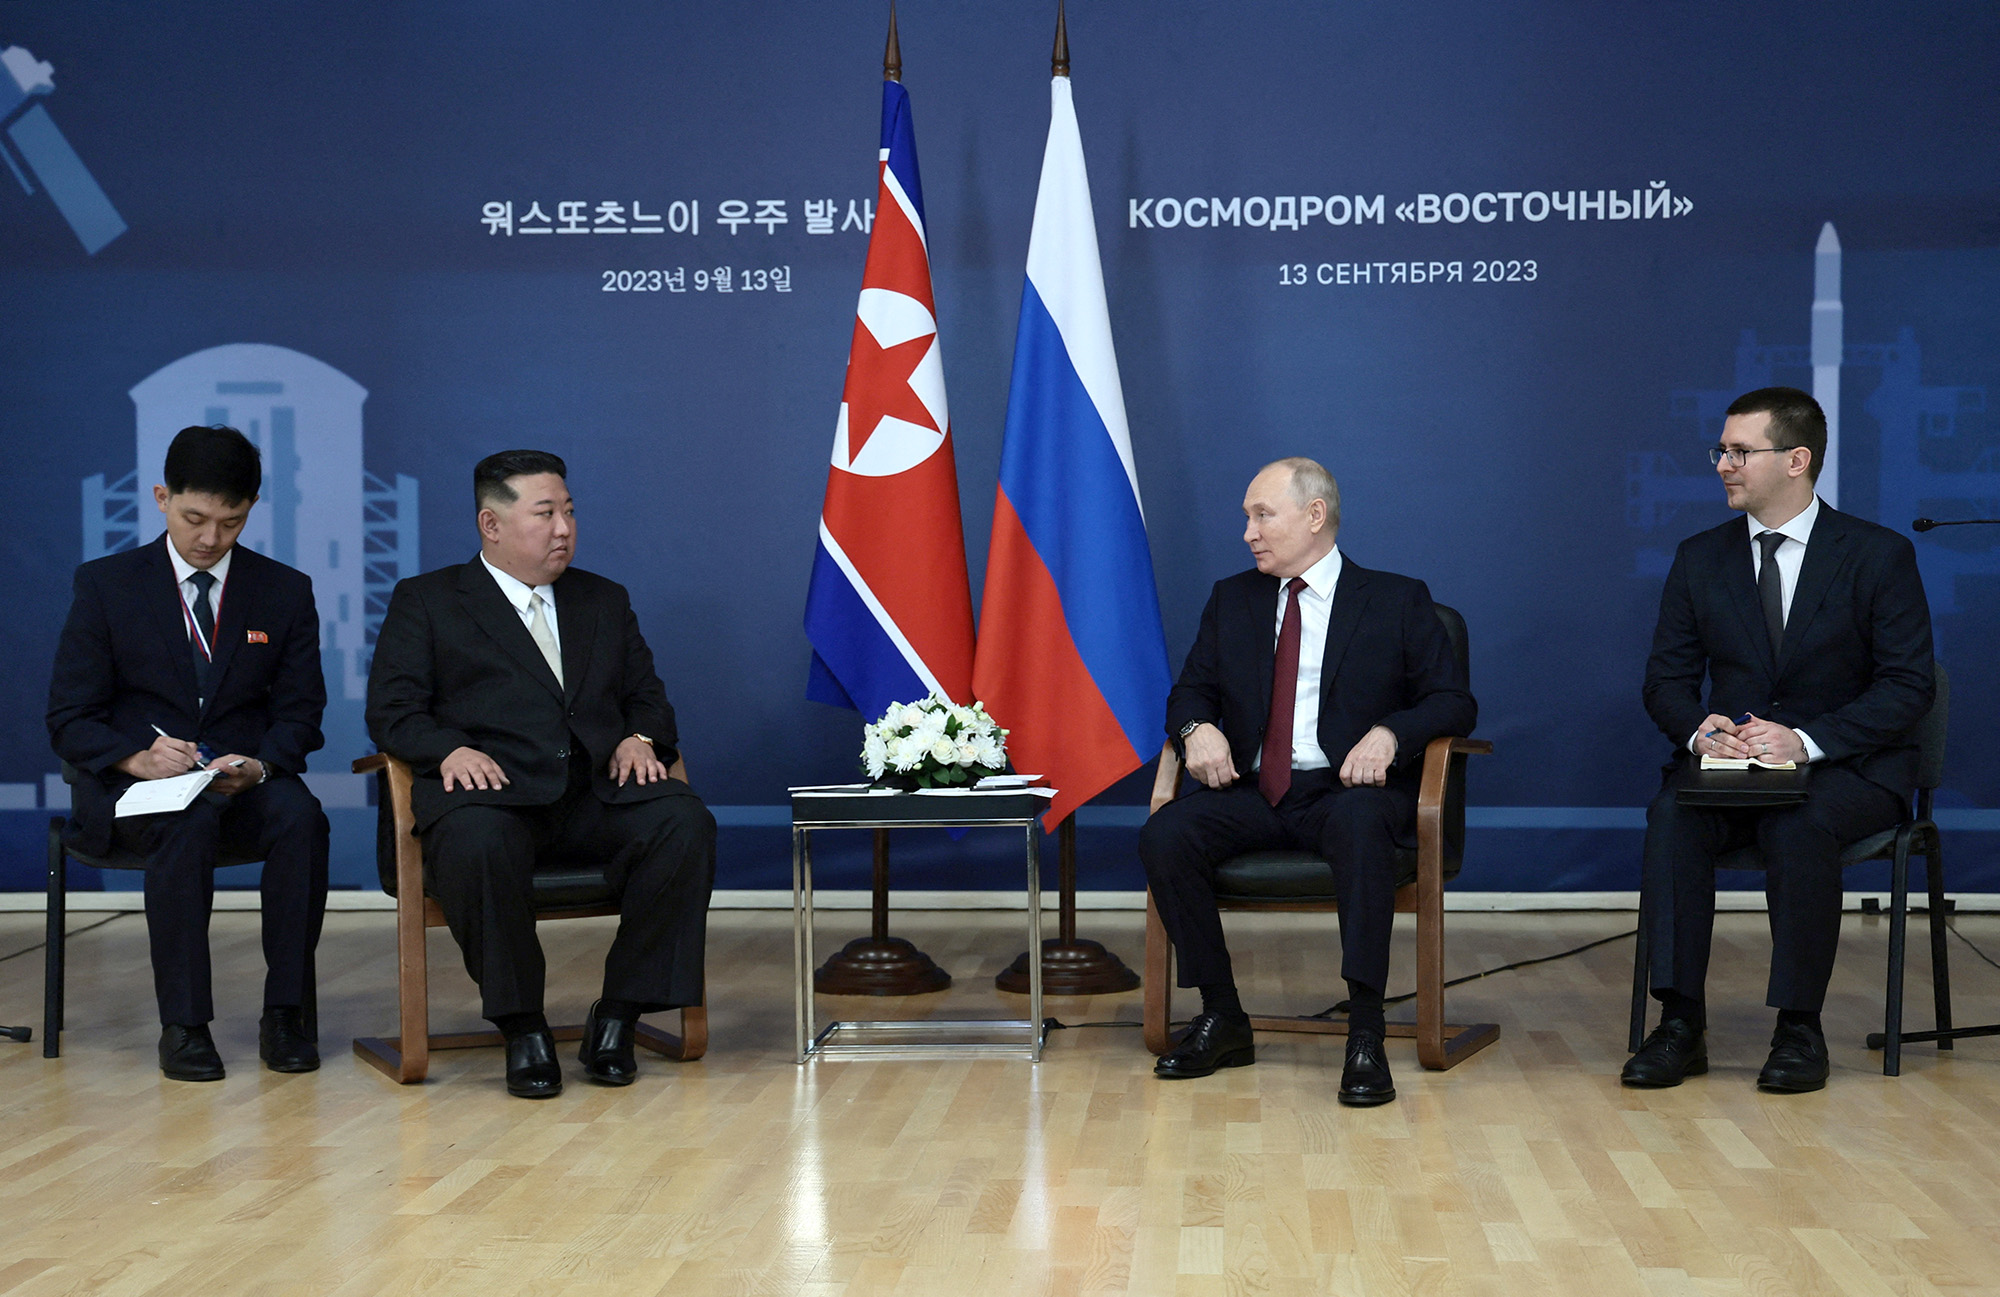 Russia's President Vladimir Putin, second right, meets with North Korea's leader Kim Jong Un, second left, at the Vostochny Сosmodrome in the far eastern Amur region, Russia, on September 13.